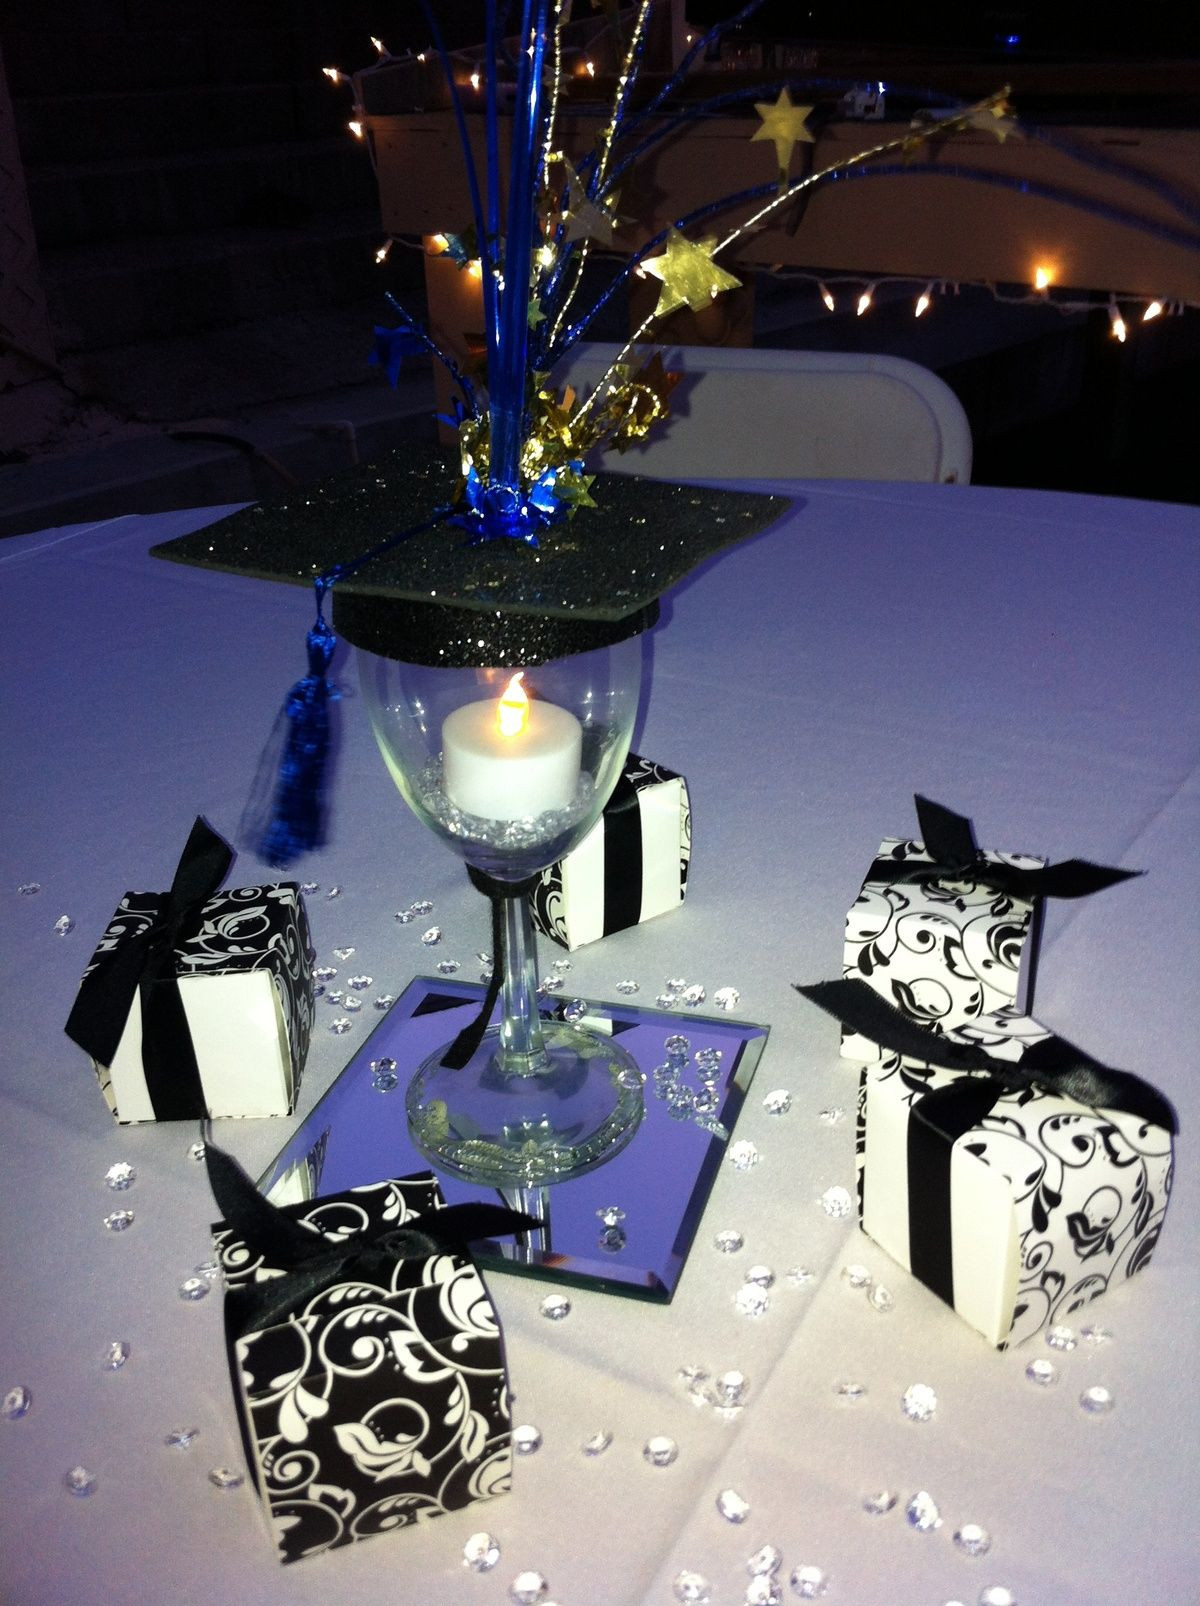 Centerpiece Ideas For College Graduation Party
 Pin by Wanda Smith on Graduation ideas